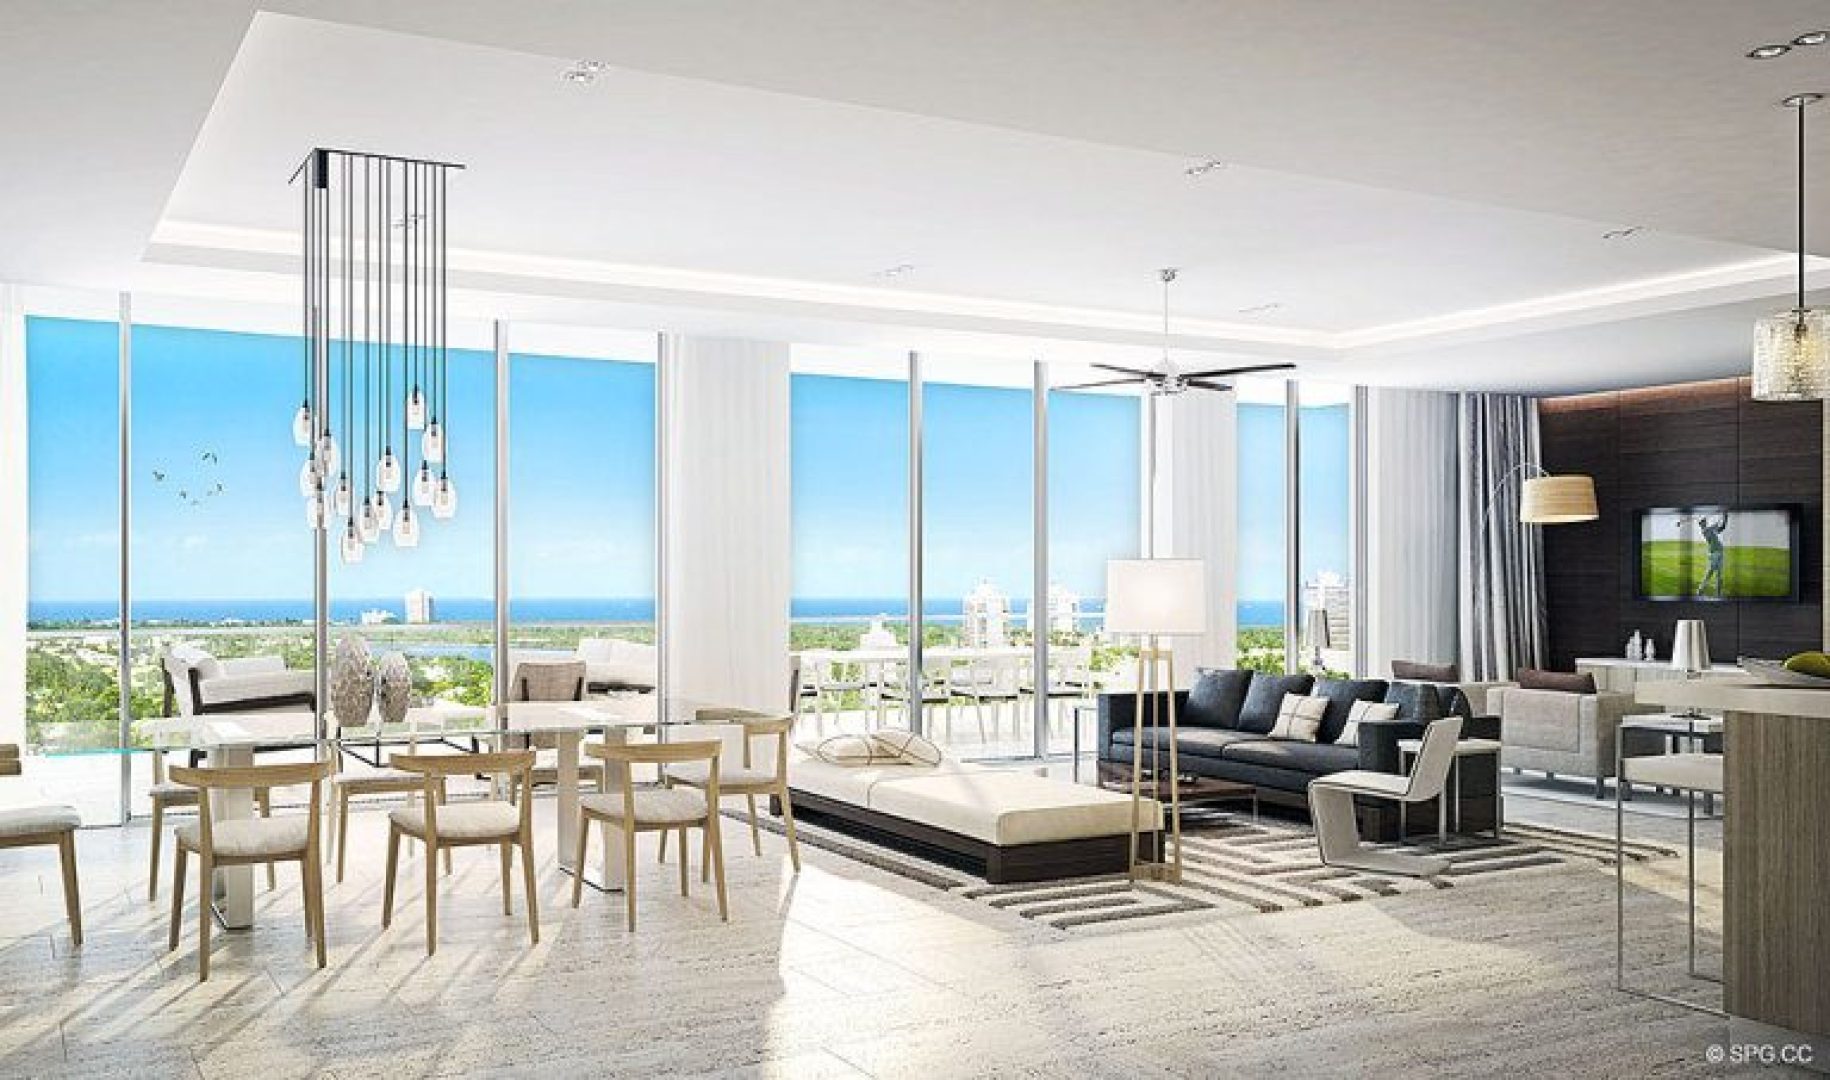 Open Great Room Concept for Riva, Luxury Waterfront Condos in Fort Lauderdale, Florida 33304.